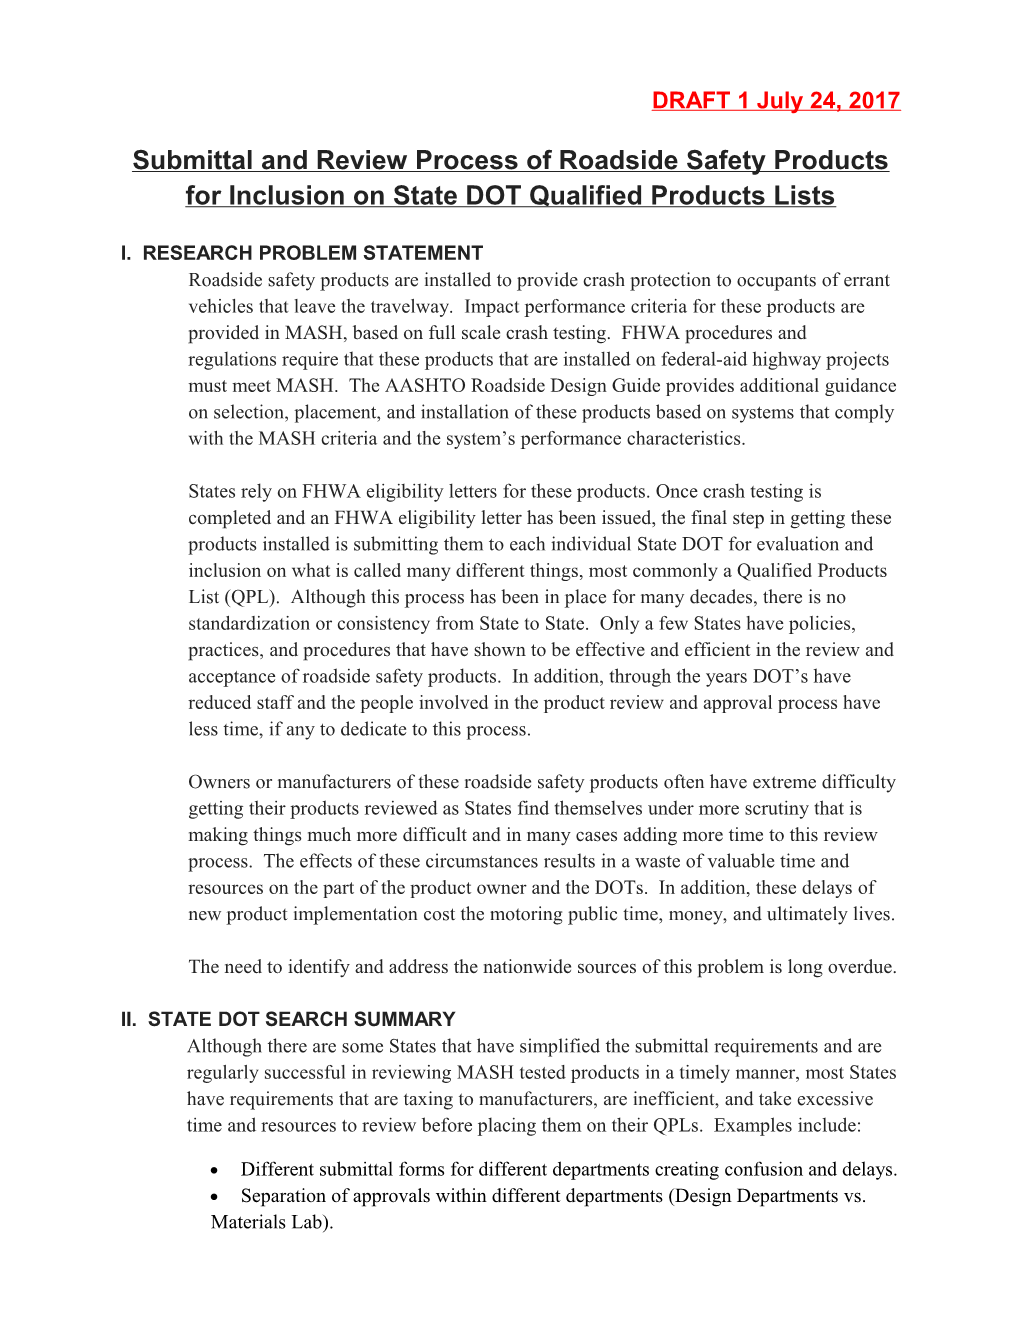 Submittal and Review Process of Roadside Safety Products for Inclusion on State DOT Qualified